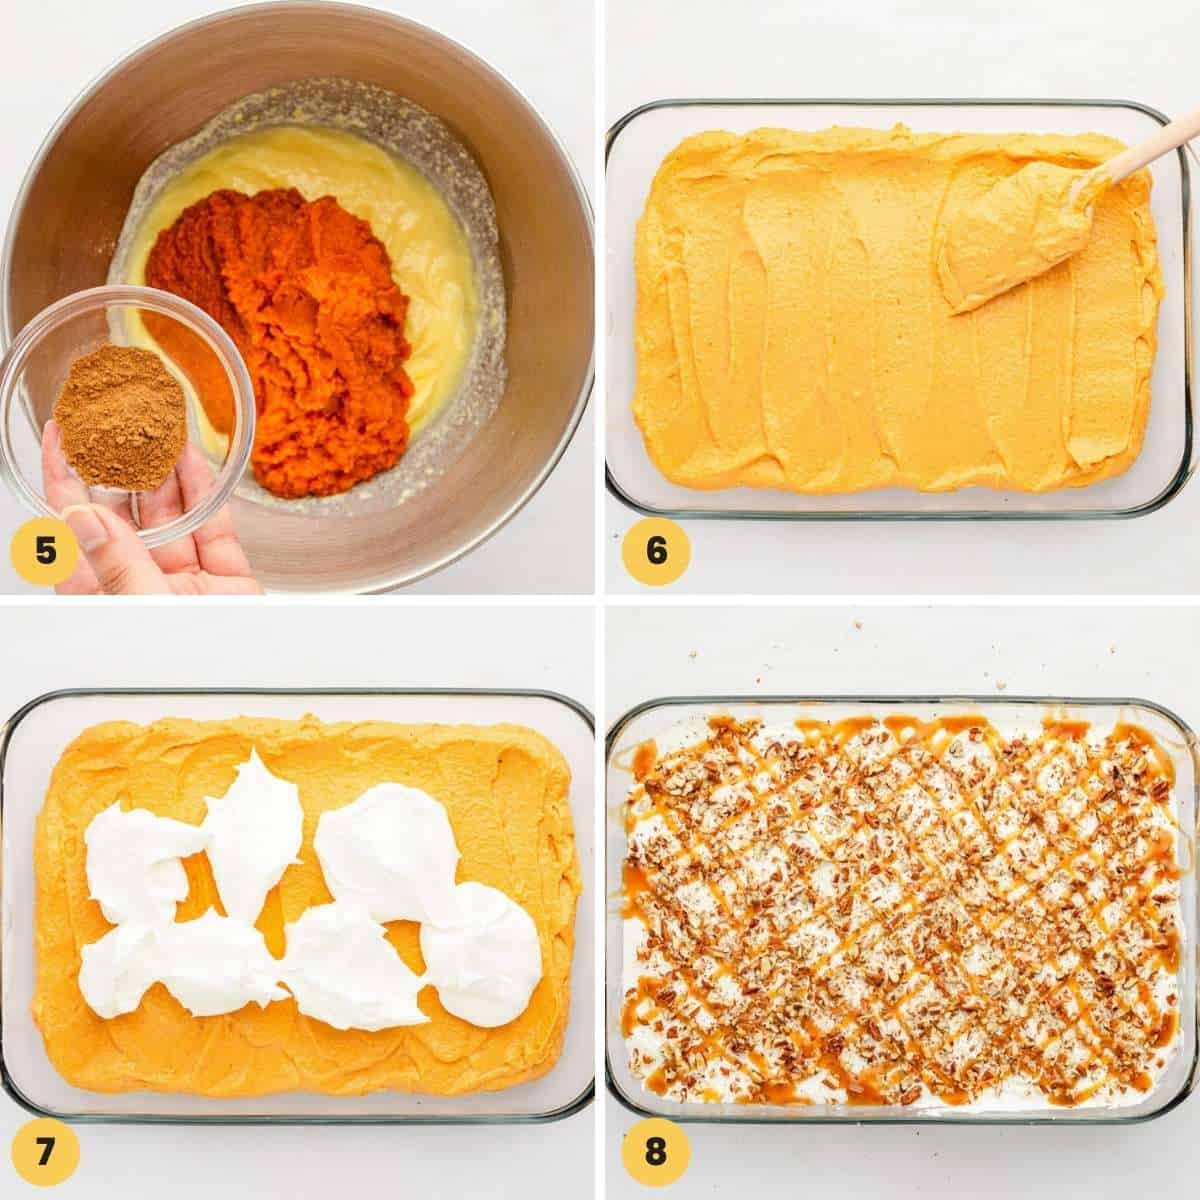 a collage of images illustrating steps 5 through 8 of how to make pumpkin lush